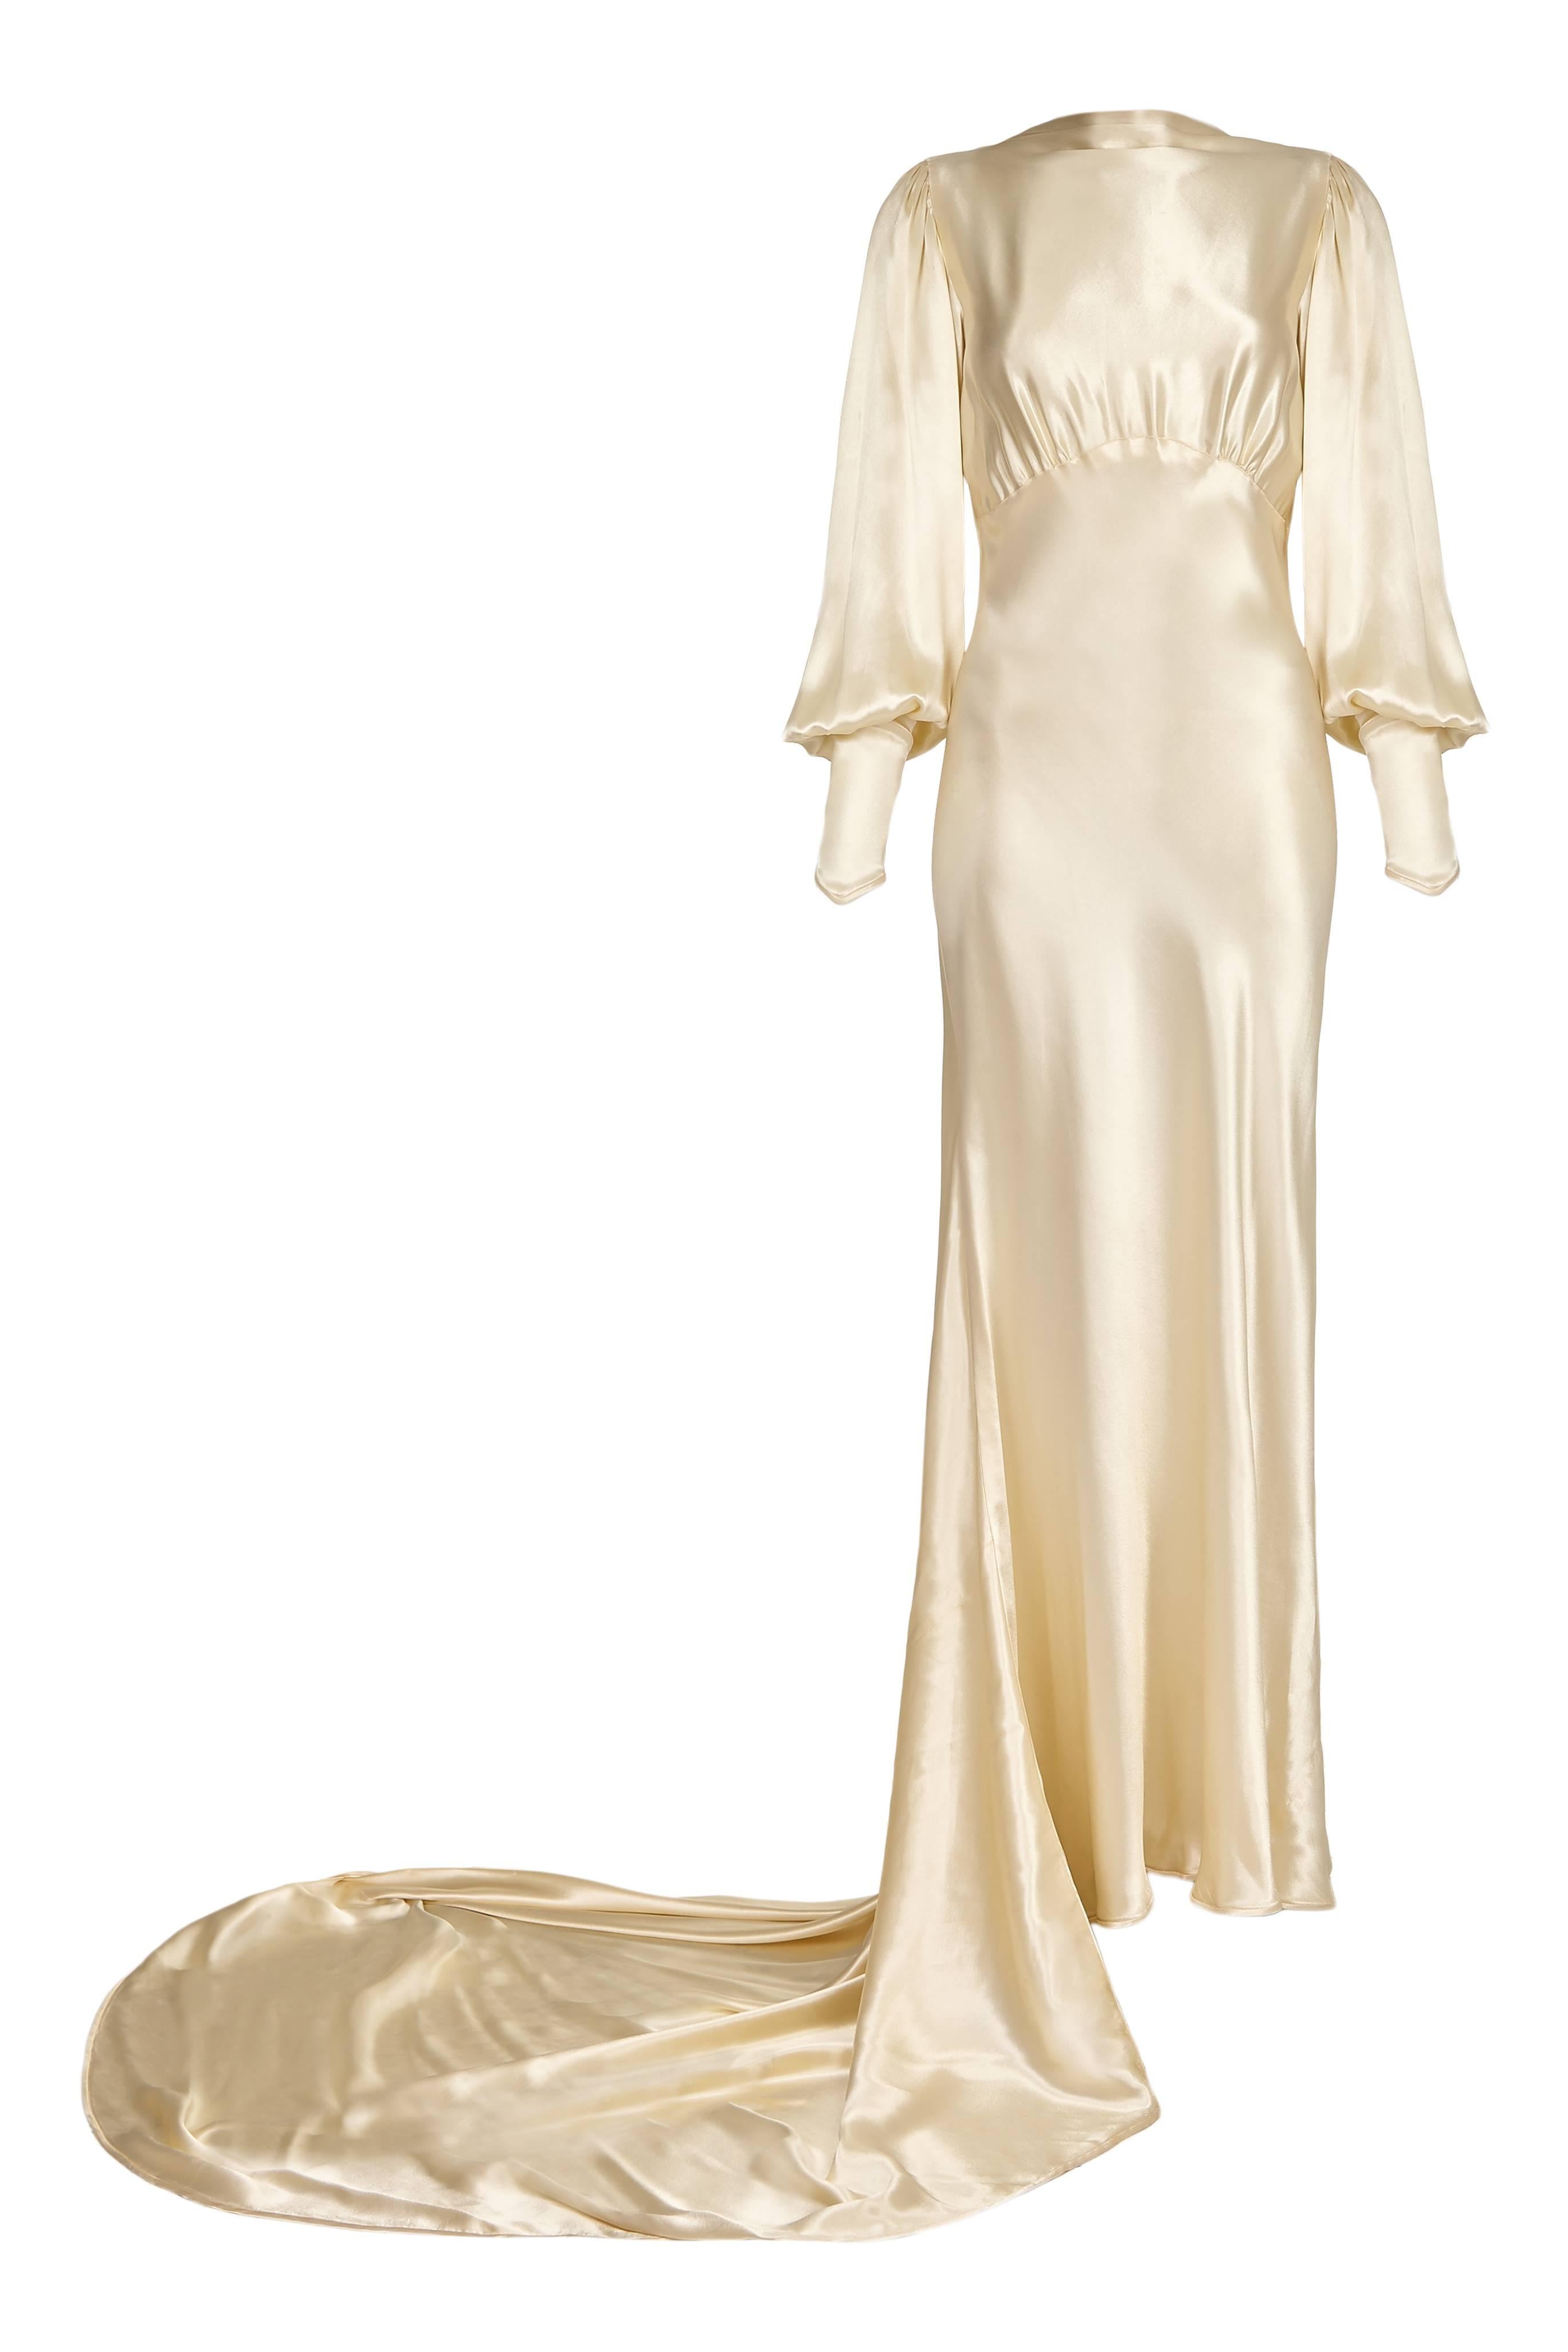 Extraordinary vintage 1930s wedding dress in soft ivory silk satin with high neck, open back and cuffed balloon sleeves. This is an extremely elegant gown with a long train and cut on the bias making it very flattering and also flexible in size. 